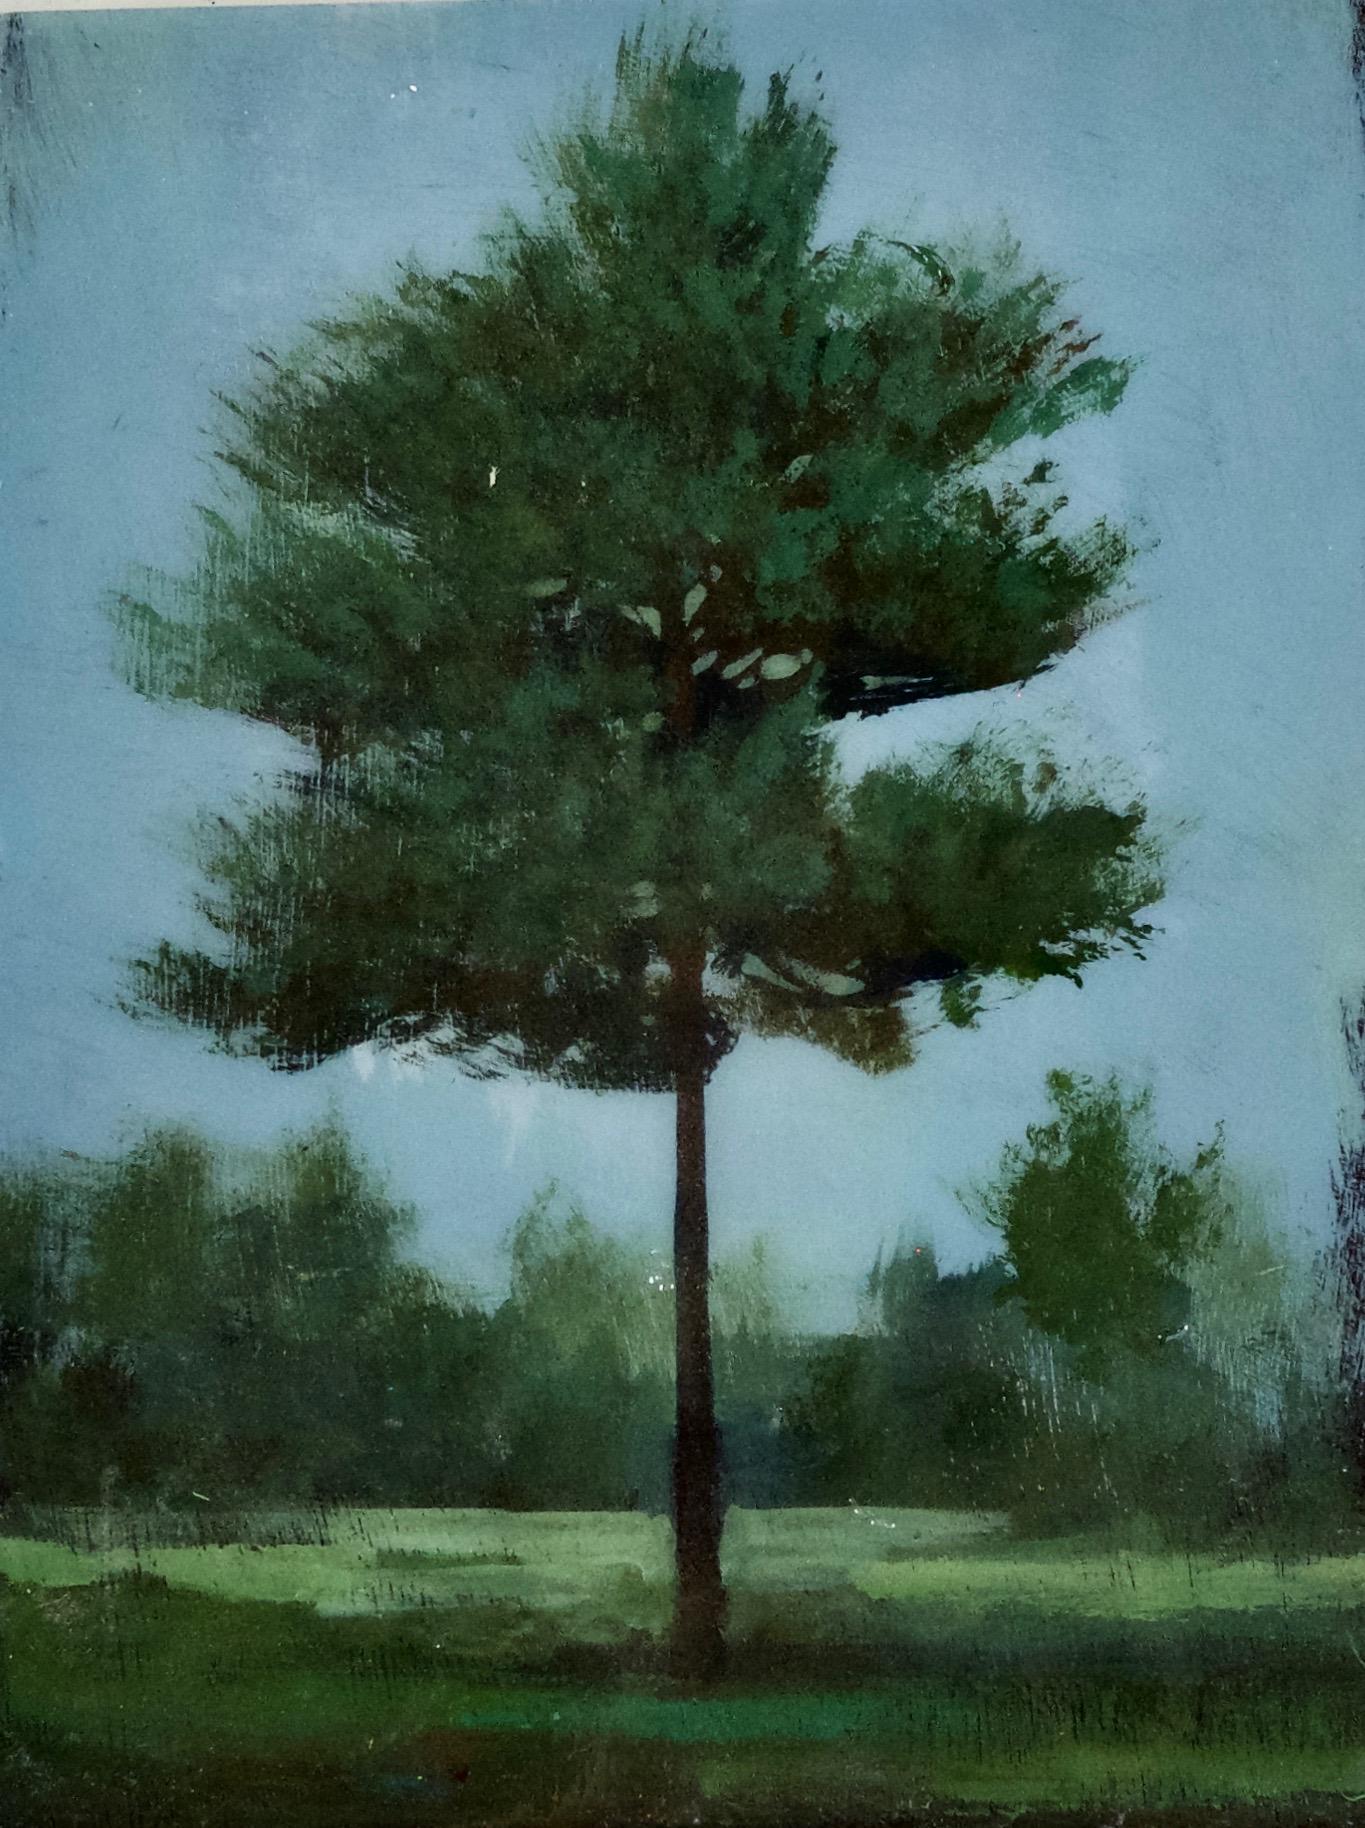 Peter Hoffer portrays trees. He invites the audience to take a closer look at their posture, their details and their expressions. The subject is as important as the technique: the way trees grate, scratch and age is as much of a concern to Hoffer as